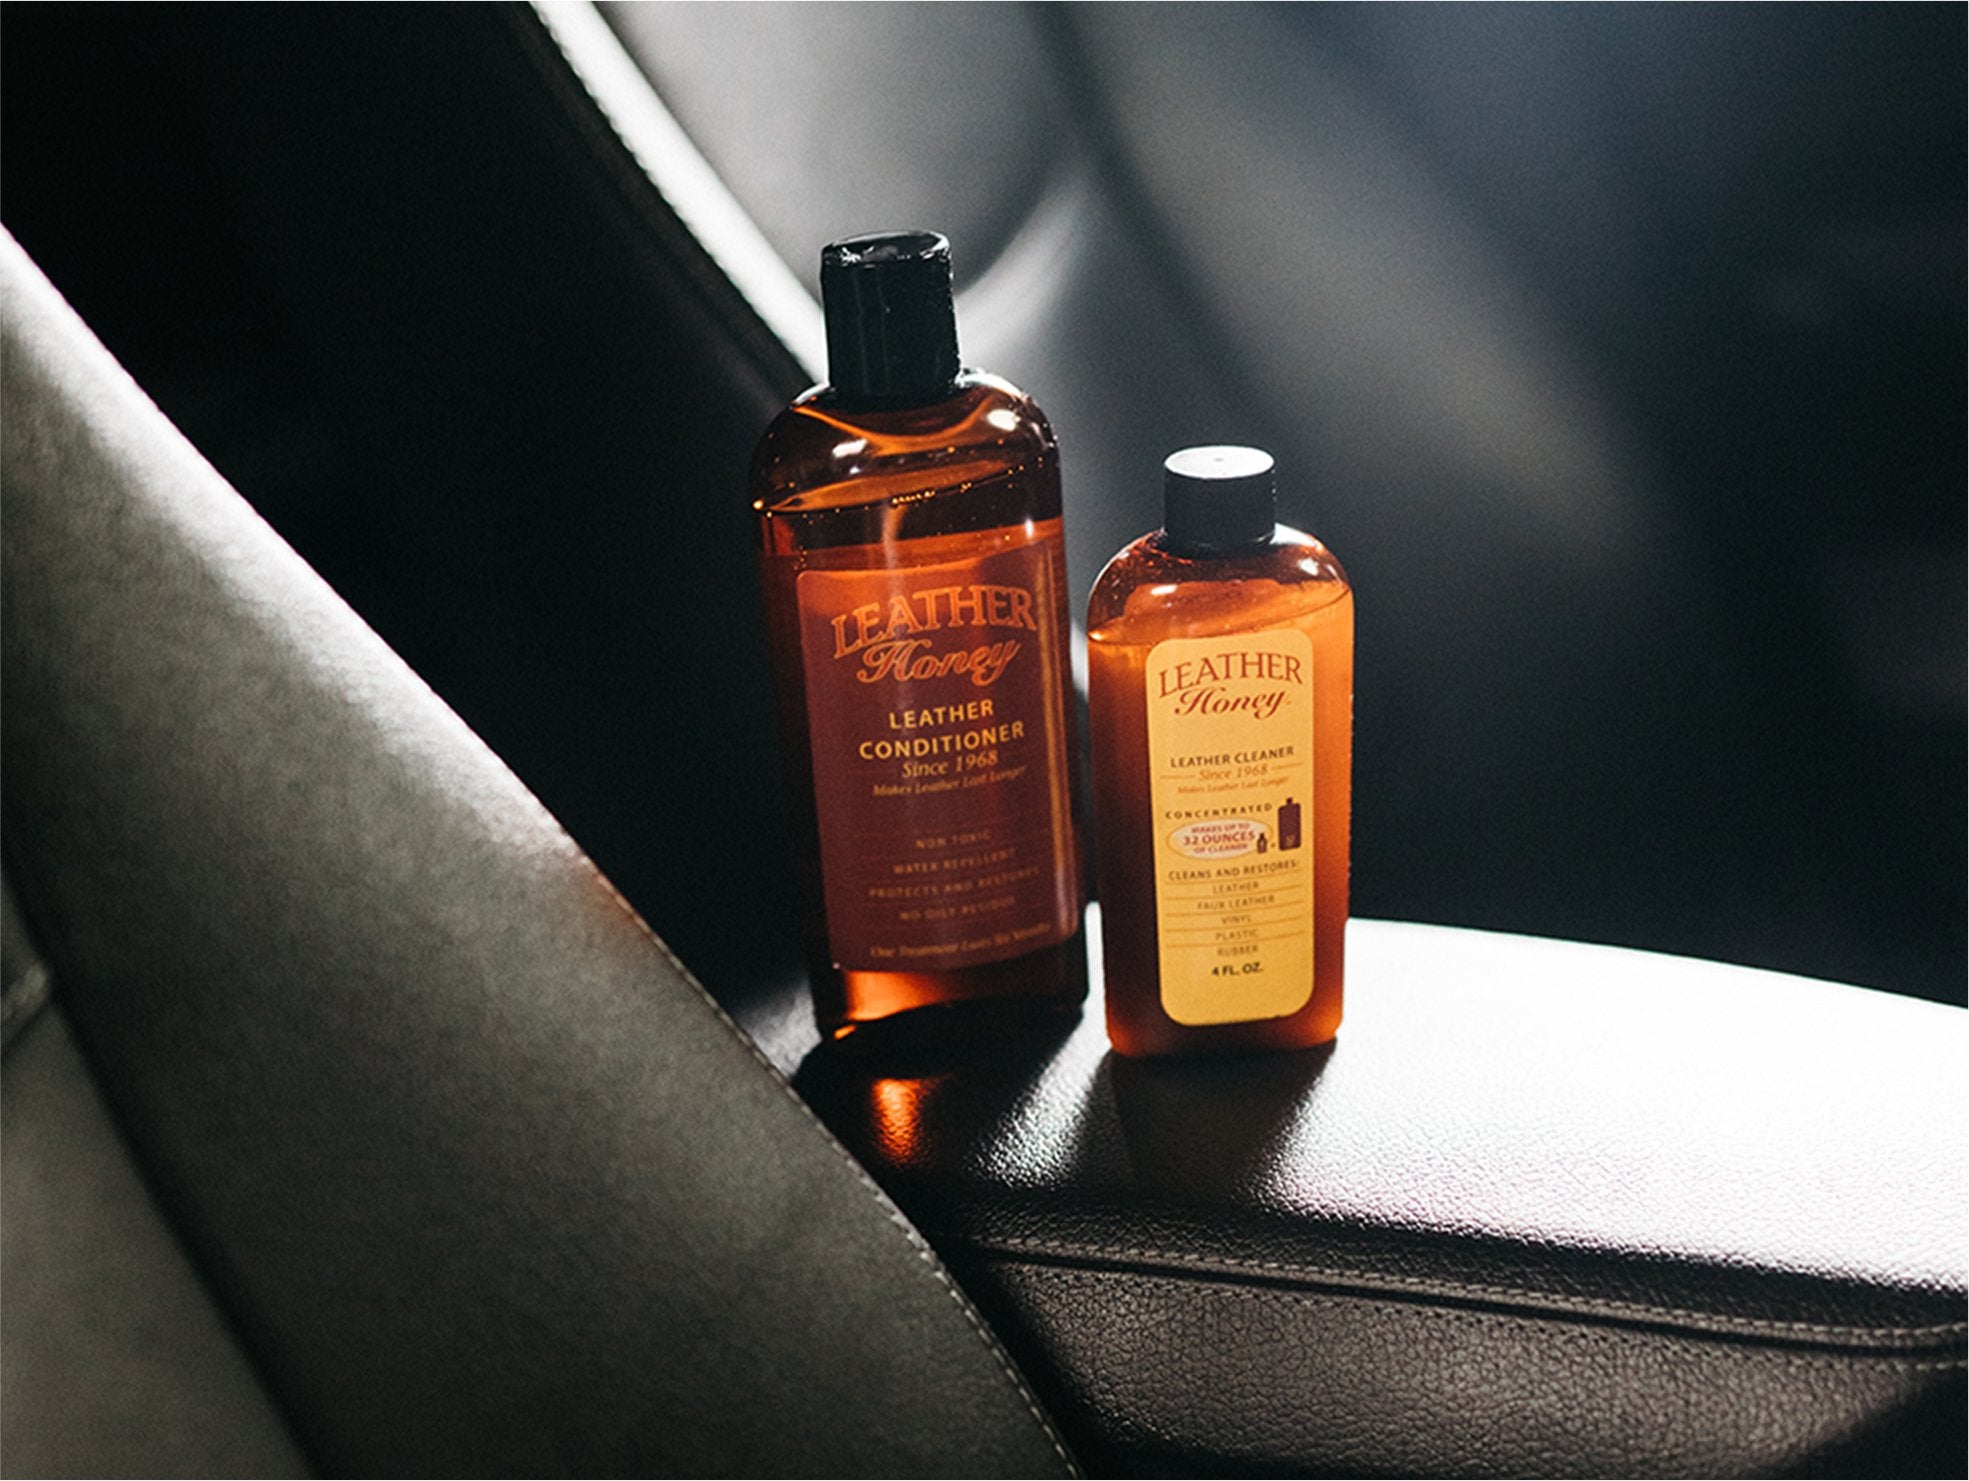 Leather Honey leather care products clean and condition leather car seats.